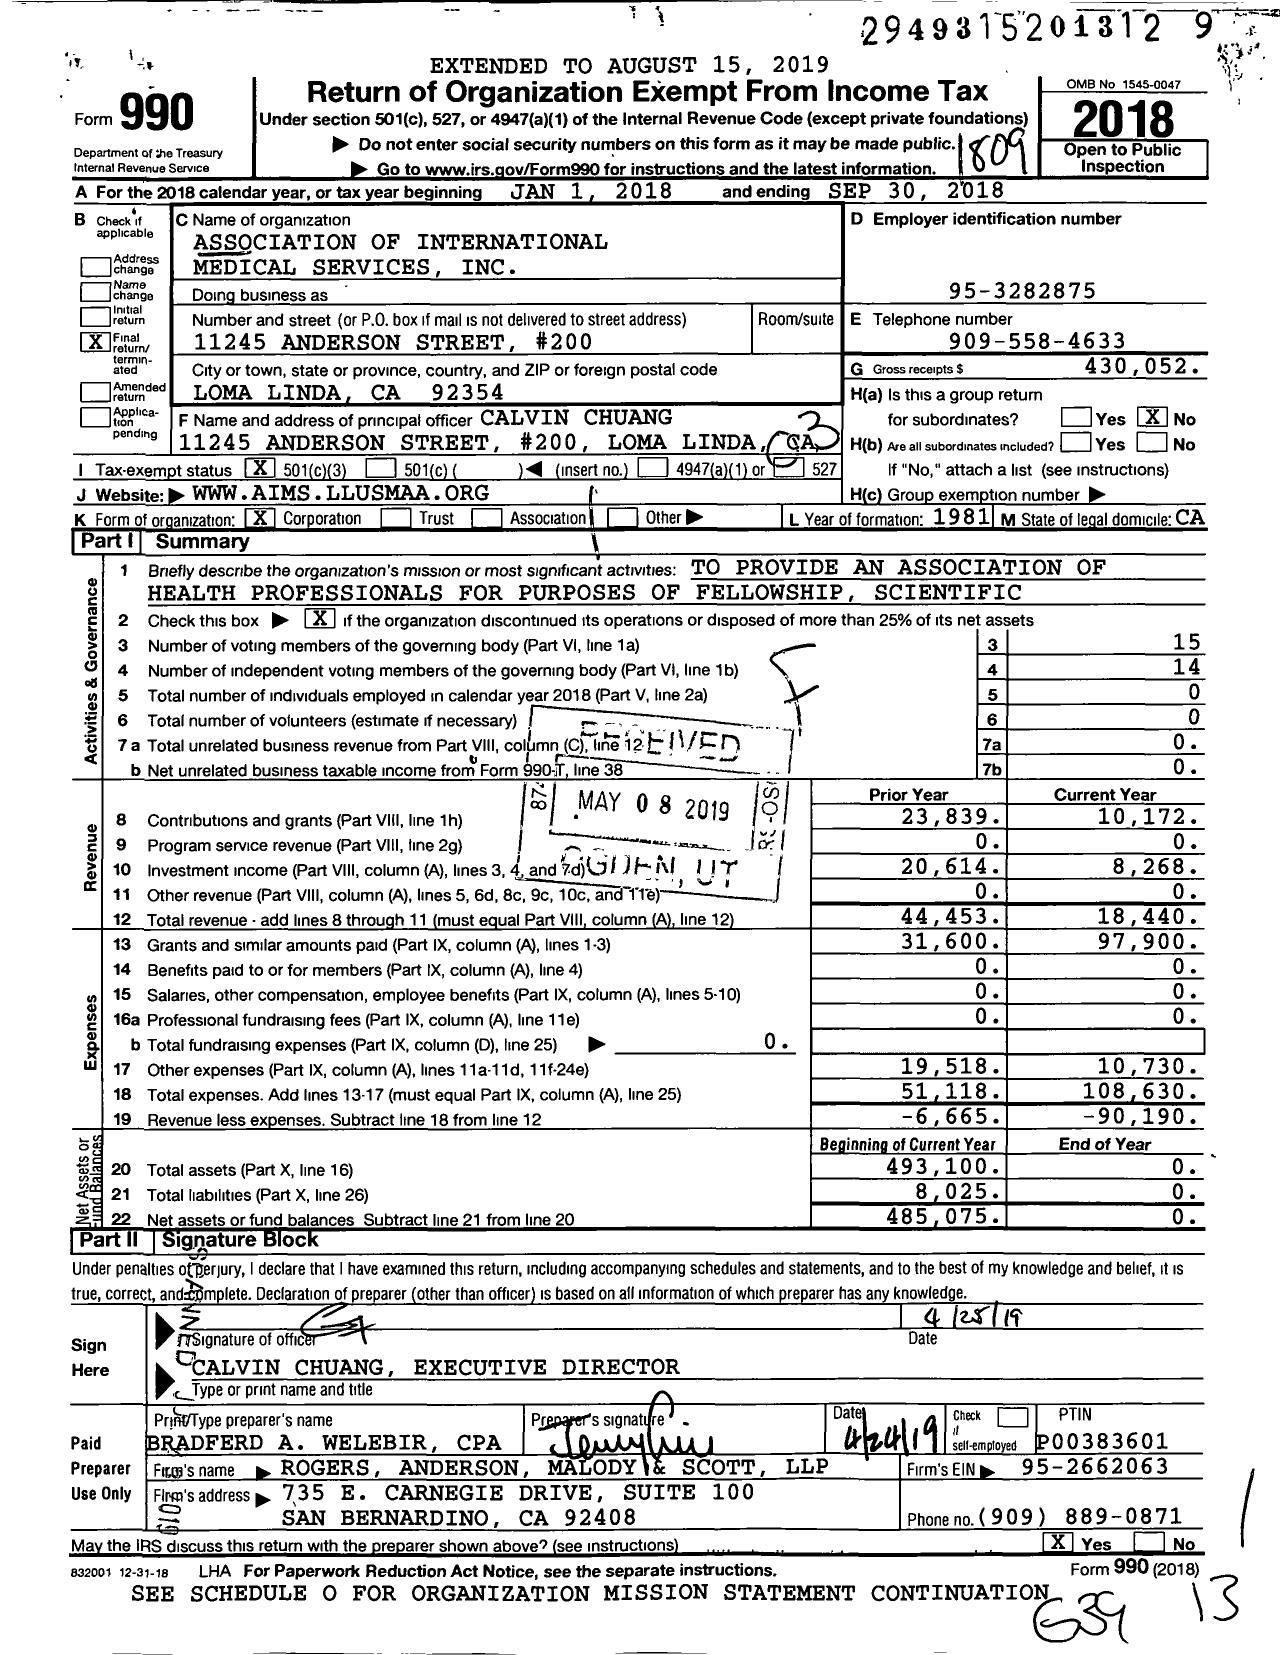 Image of first page of 2017 Form 990 for Association of International Medical Services